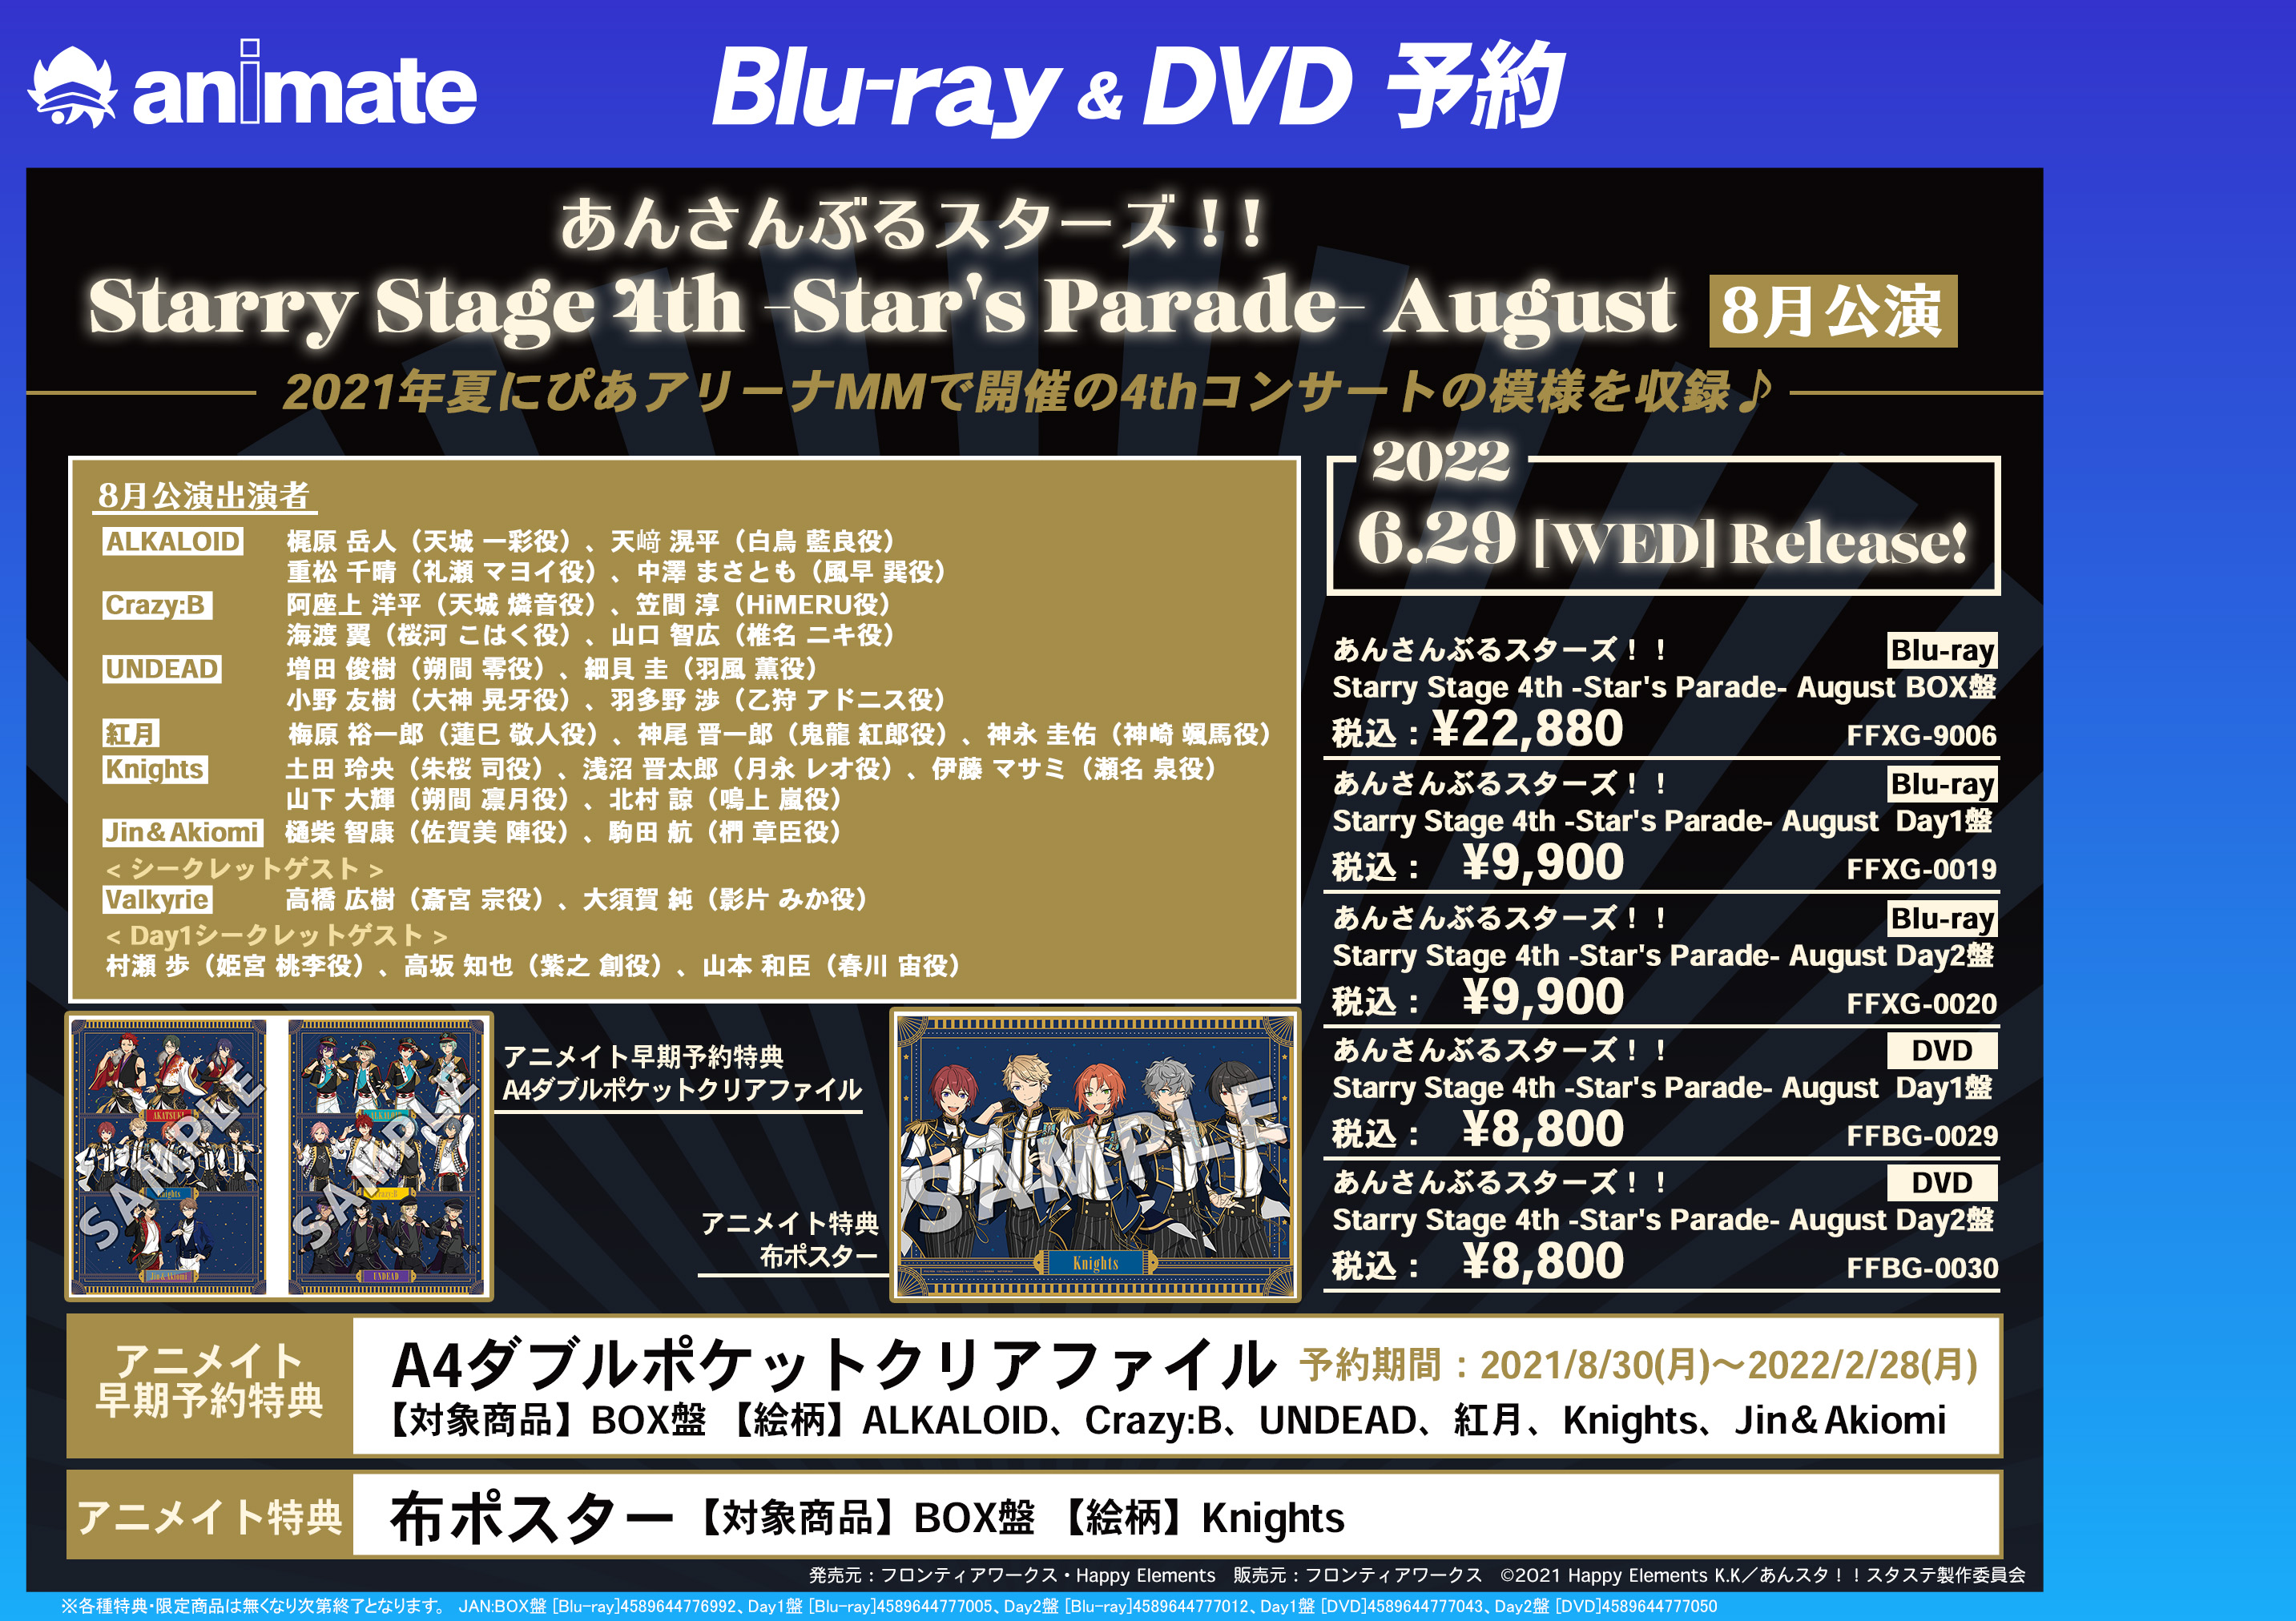 Starry Stage 4th -Star's Parade- July